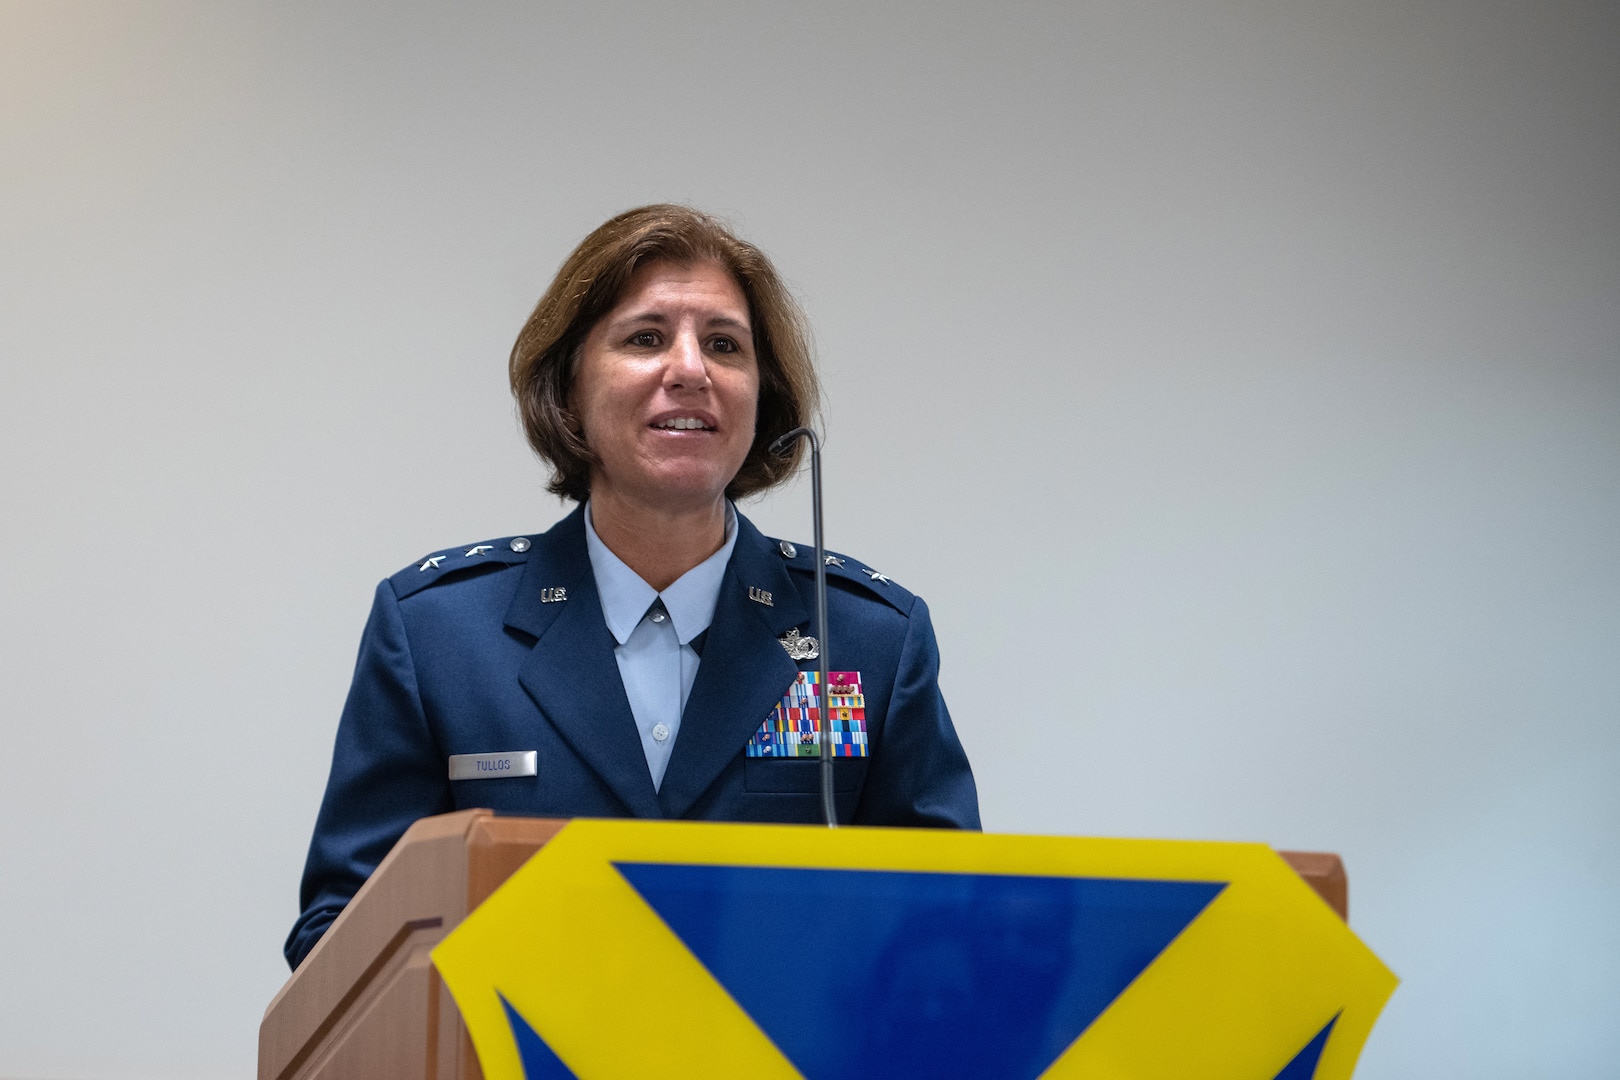 U.S. Air Force Maj. Gen. Andrea Tullos, Second Air Force commander, Keesler Air Force Base, Miss., addresses the audience during the 37th Training Wing change of command ceremony July 15, 2020